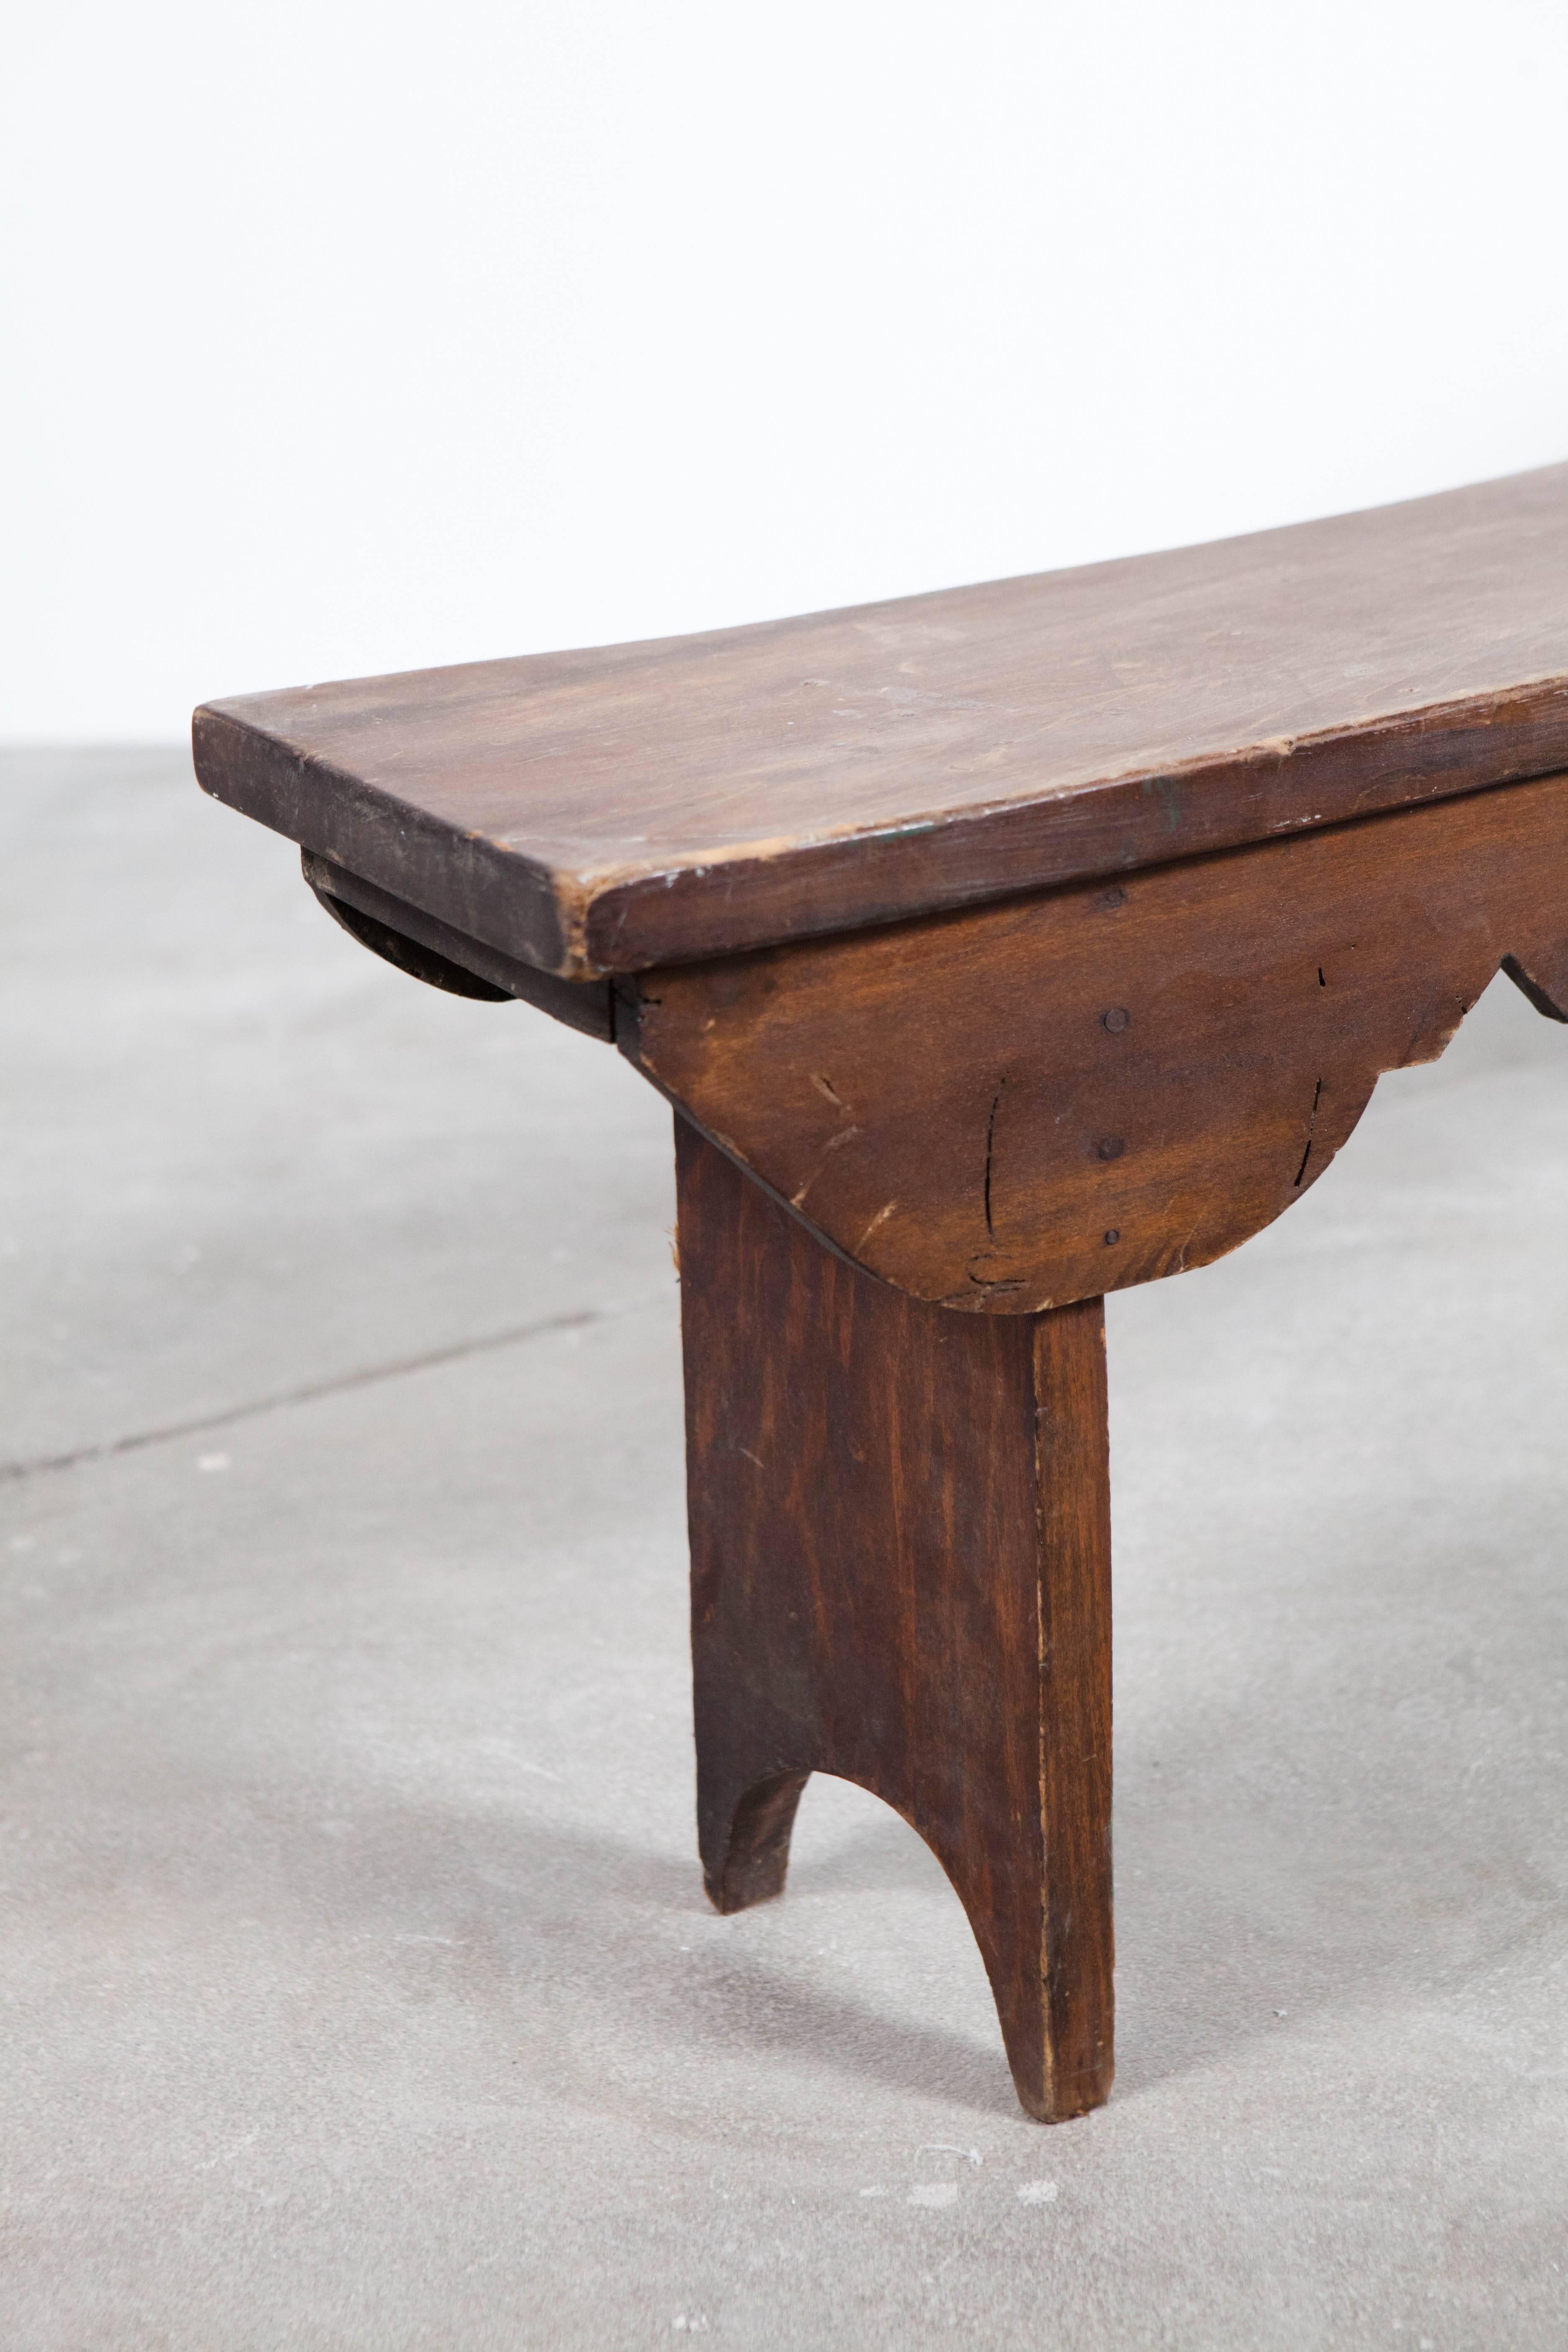 Mid-20th Century Curved Wooden Bench with Carved Decorative Apron